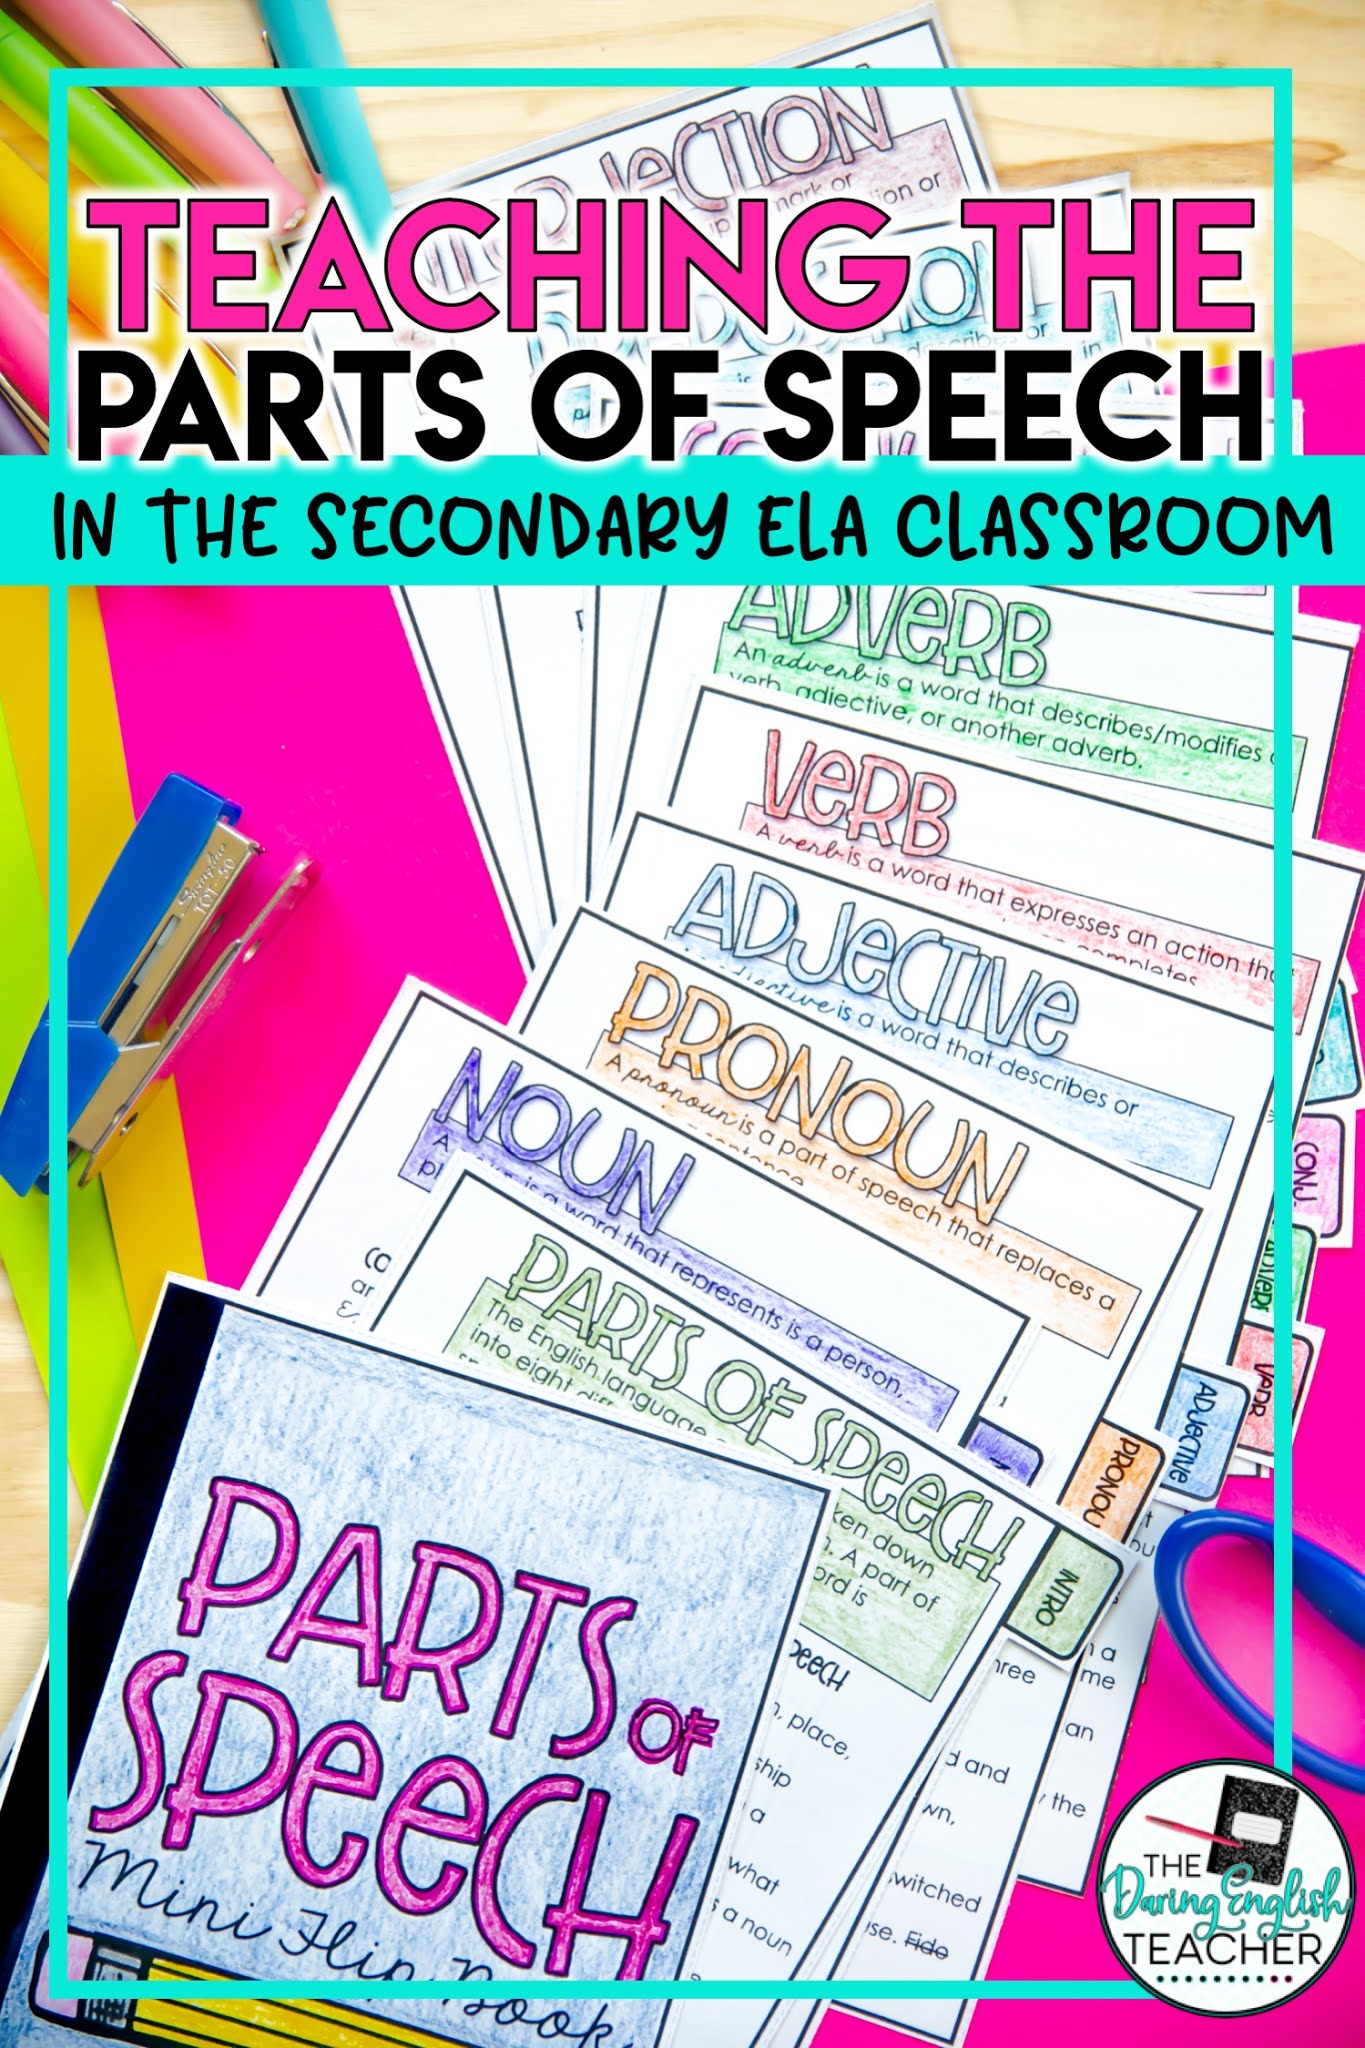 How to Teach the Parts of Speech in the Secondary ELA Classroom